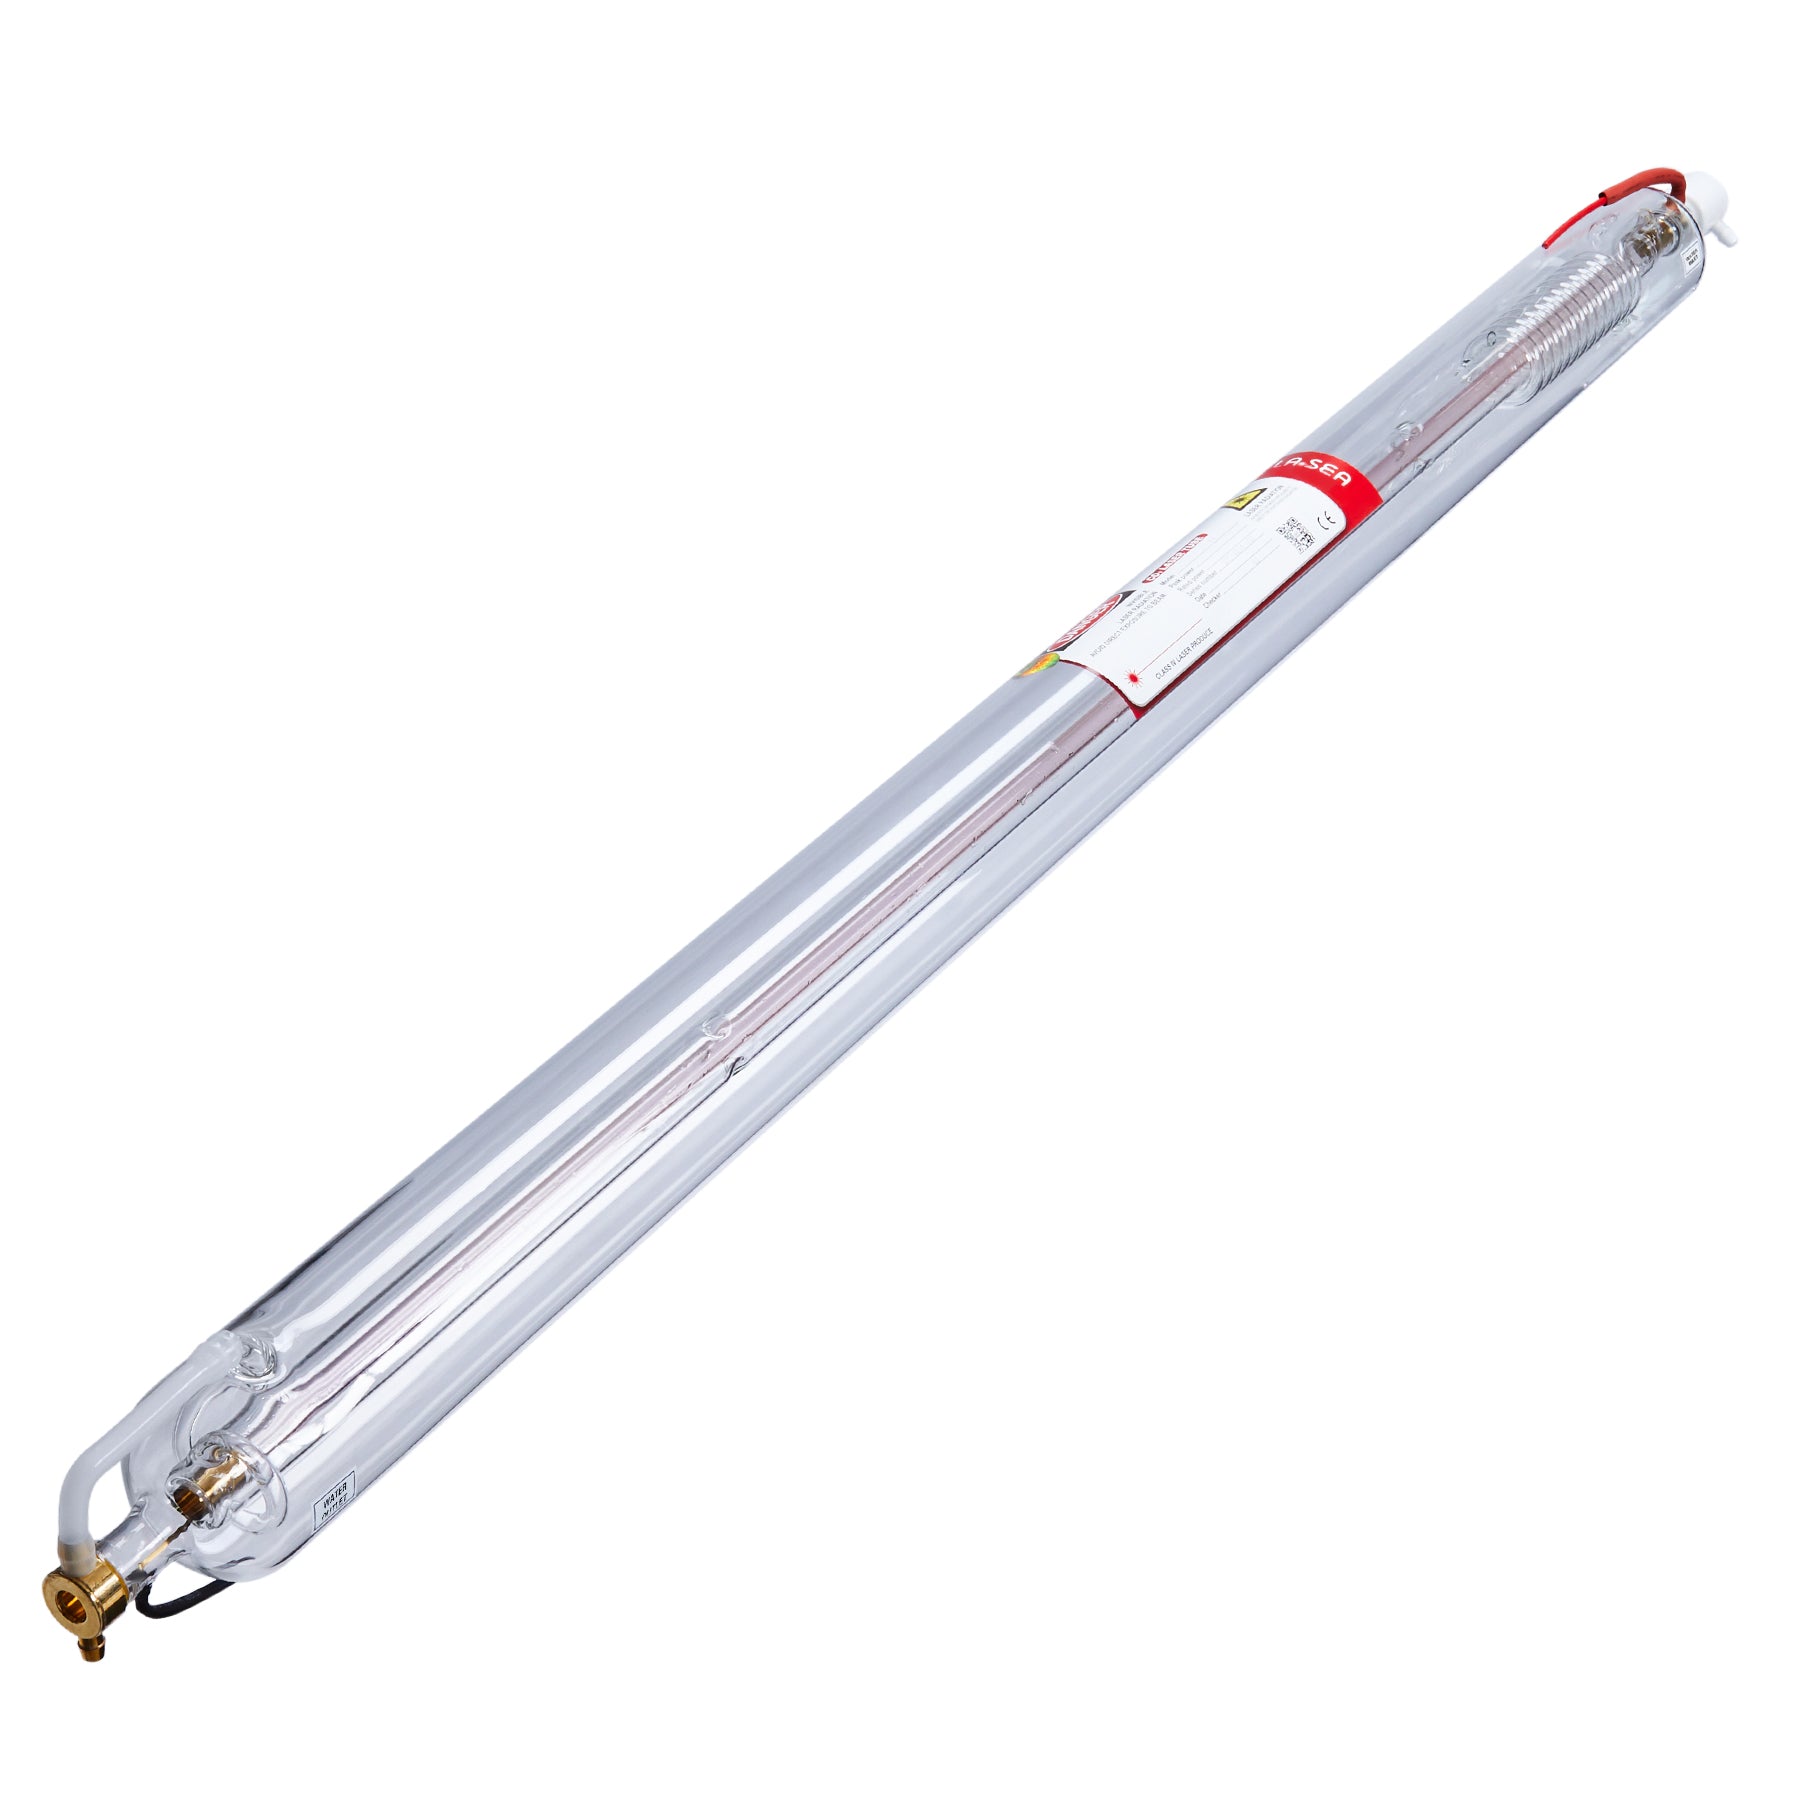 80W CO2 Laser Tube for CO2 Laser Engraver Cutting Machines | 0080